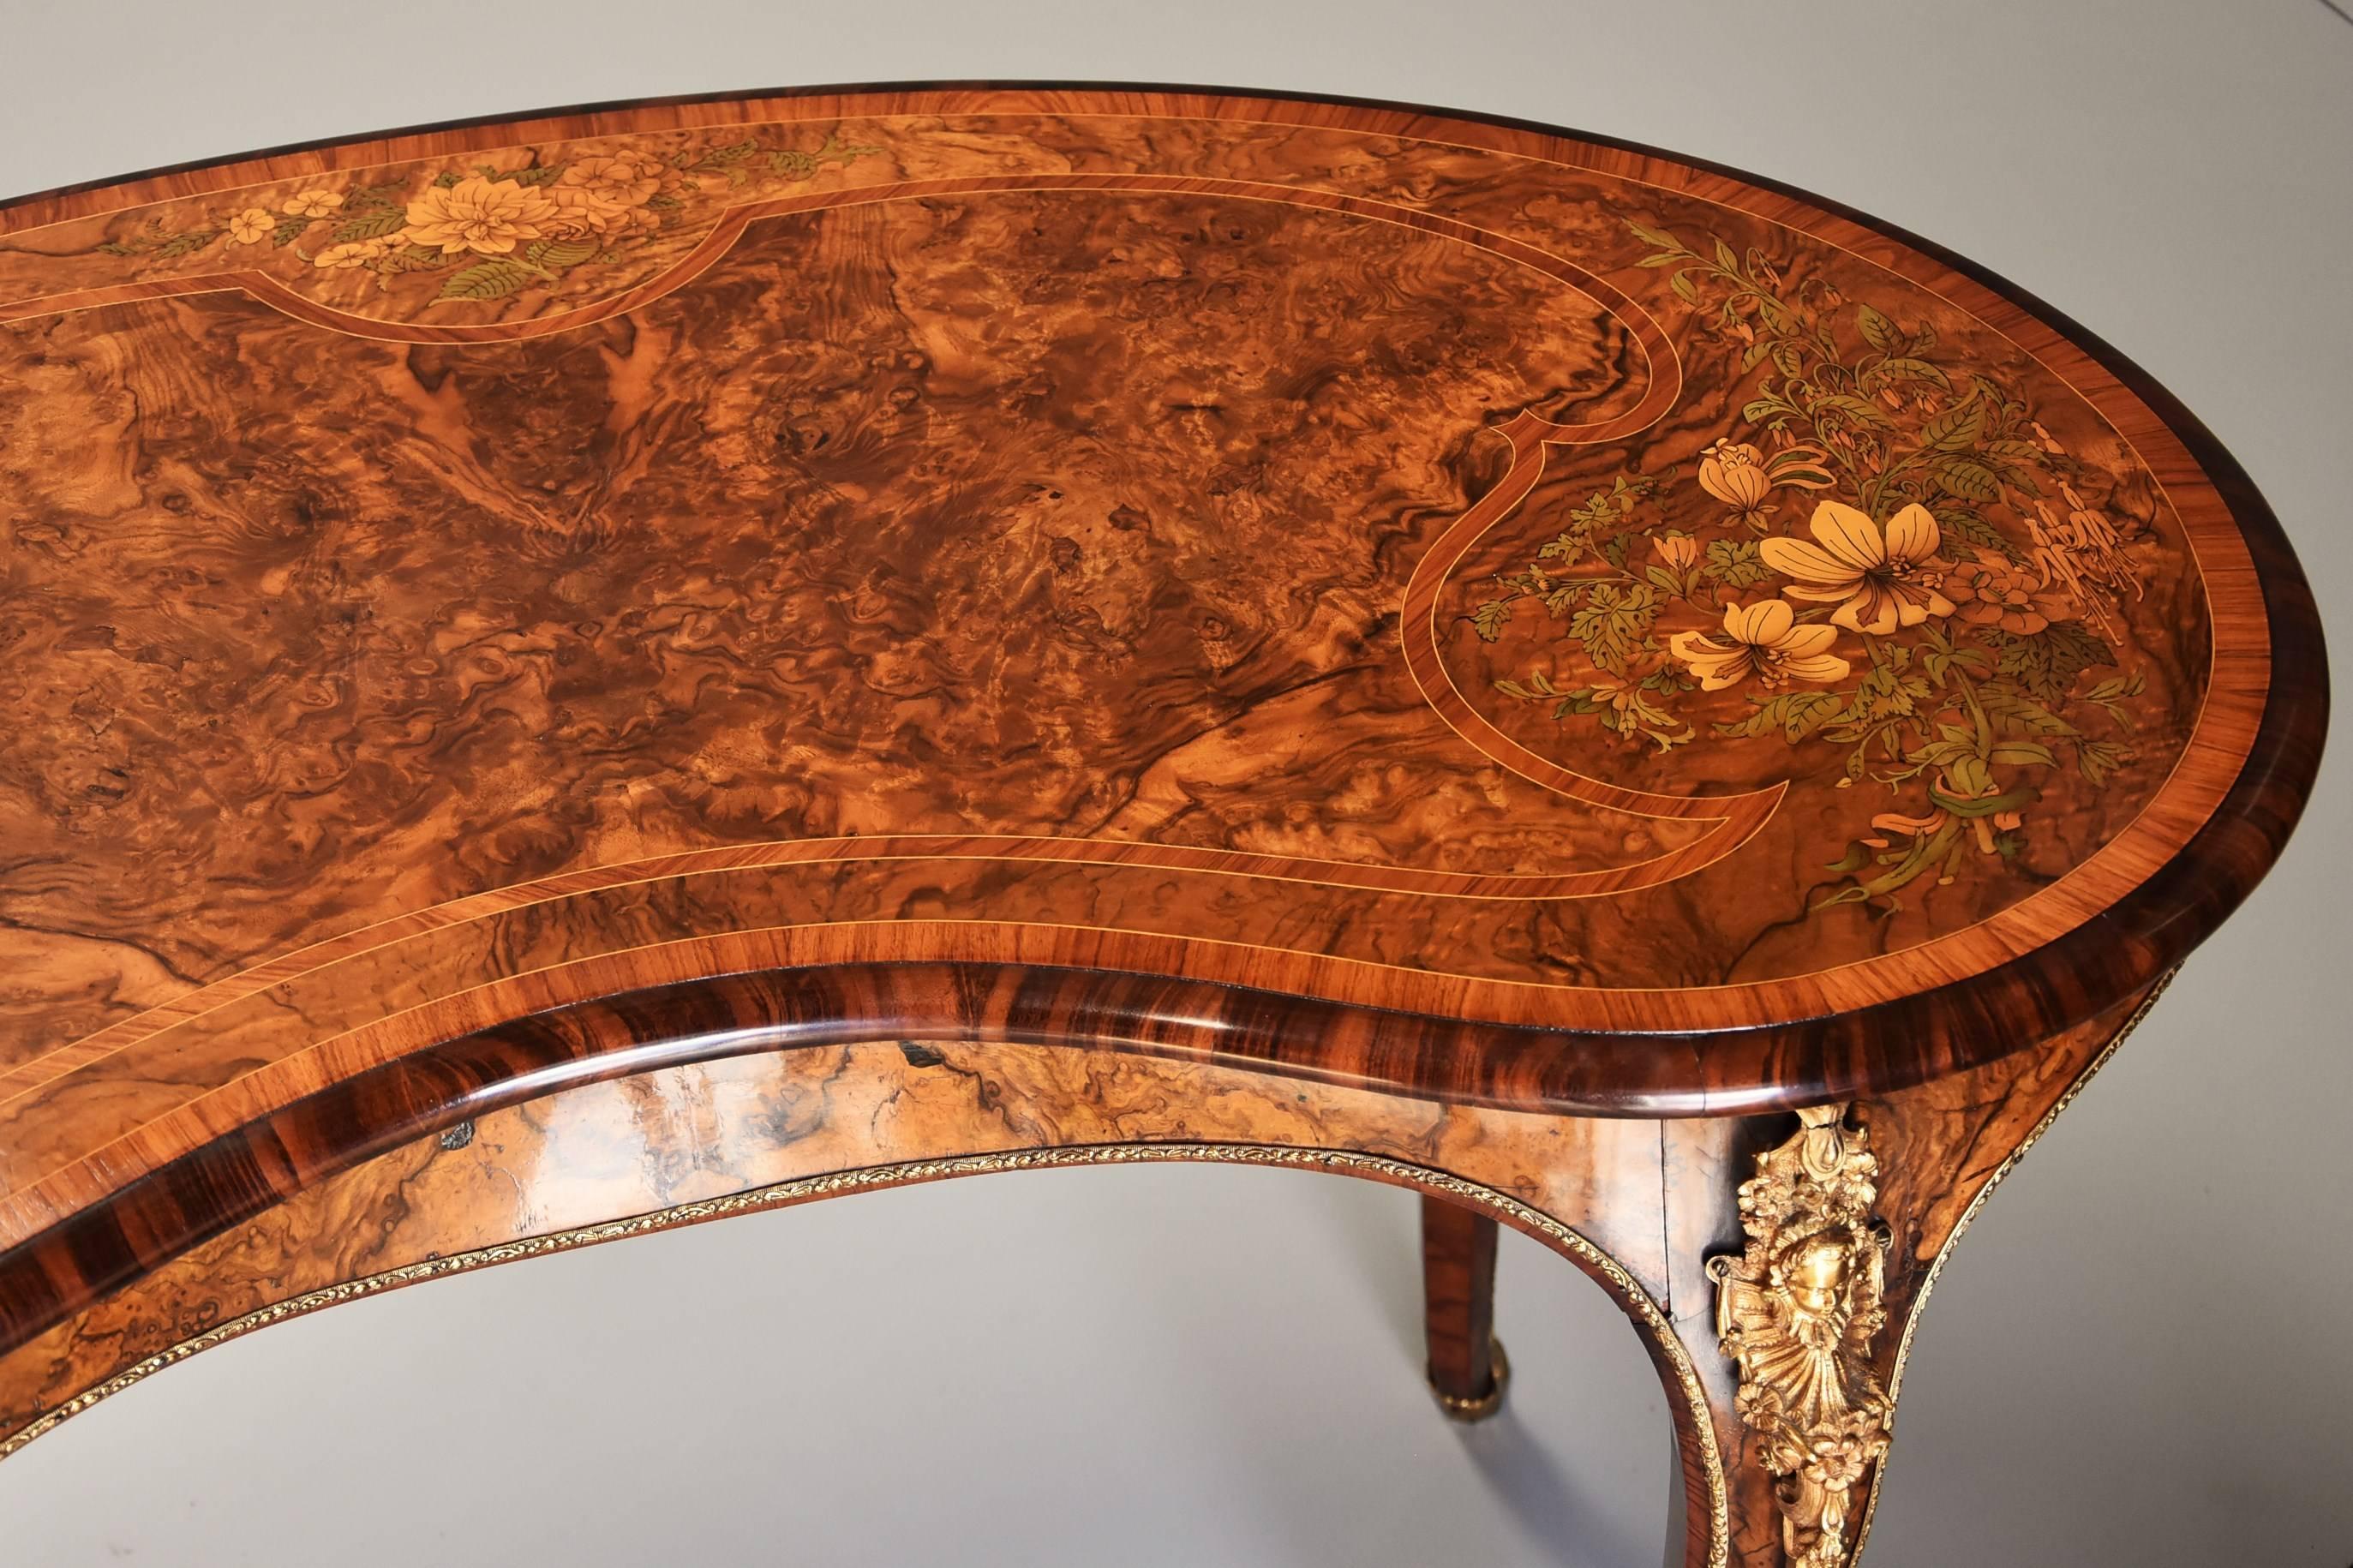 Superb Quality Mid-19th Century Burr Walnut and Marquetry Kidney Shape Table For Sale 2